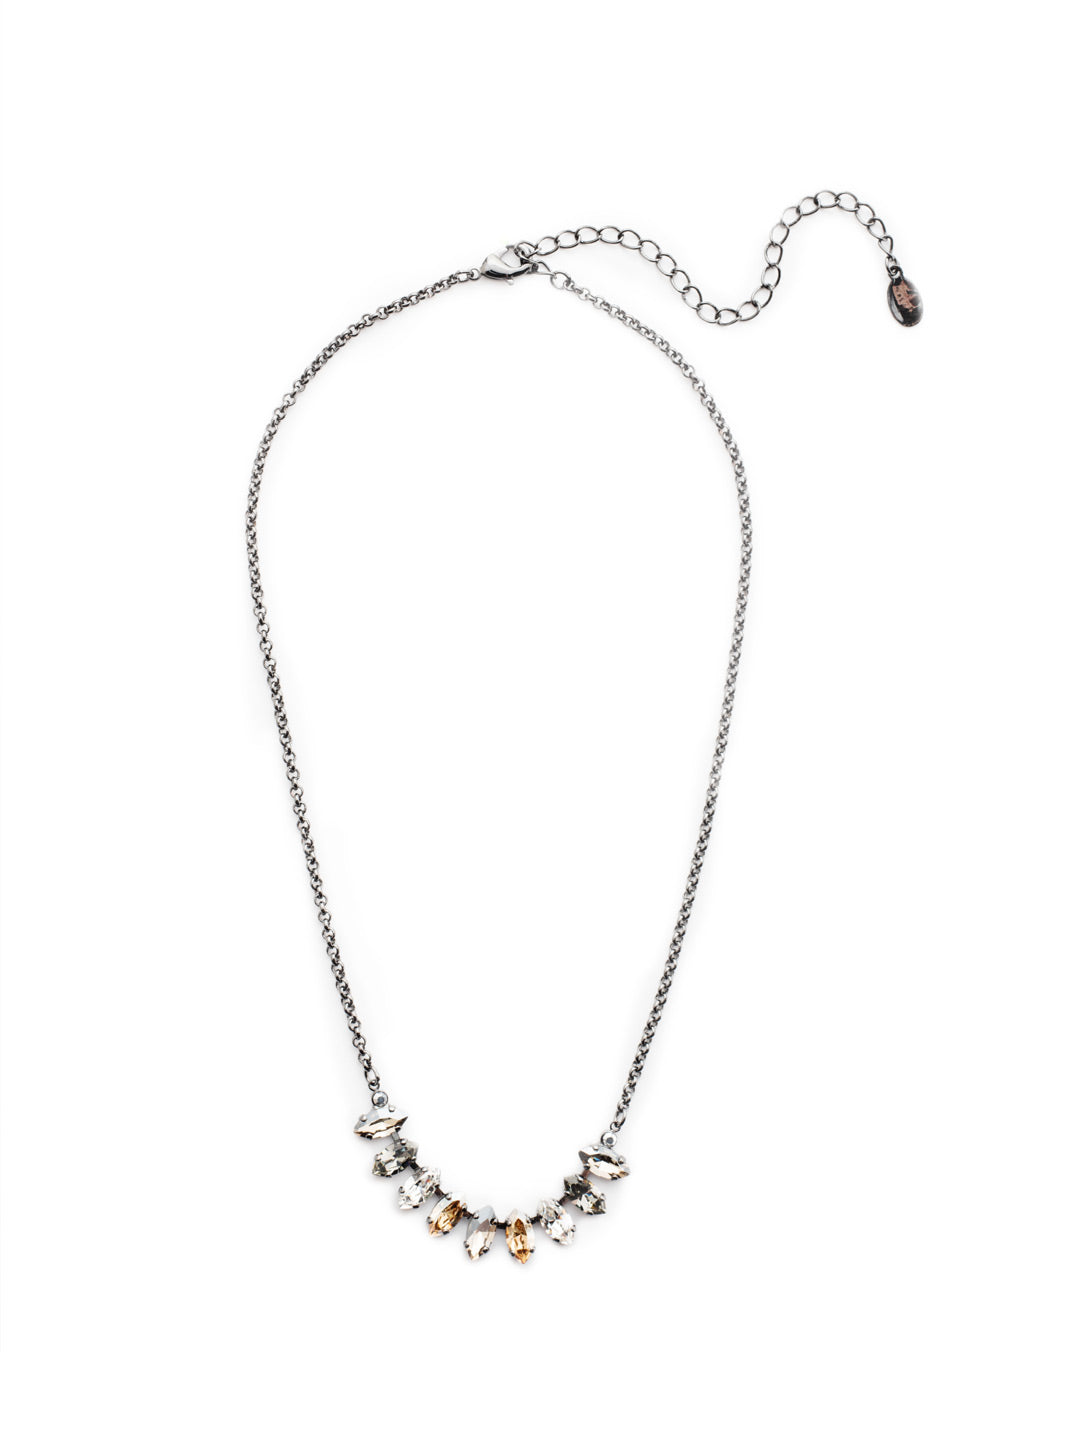 Clarissa Tennis Necklace - NEP4GMGNS - The Clarissa Tennis Necklace puts a row of sparkling navette crystals front and center. Put it on when you want to be there, too. From Sorrelli's Golden Shadow collection in our Gun Metal finish.